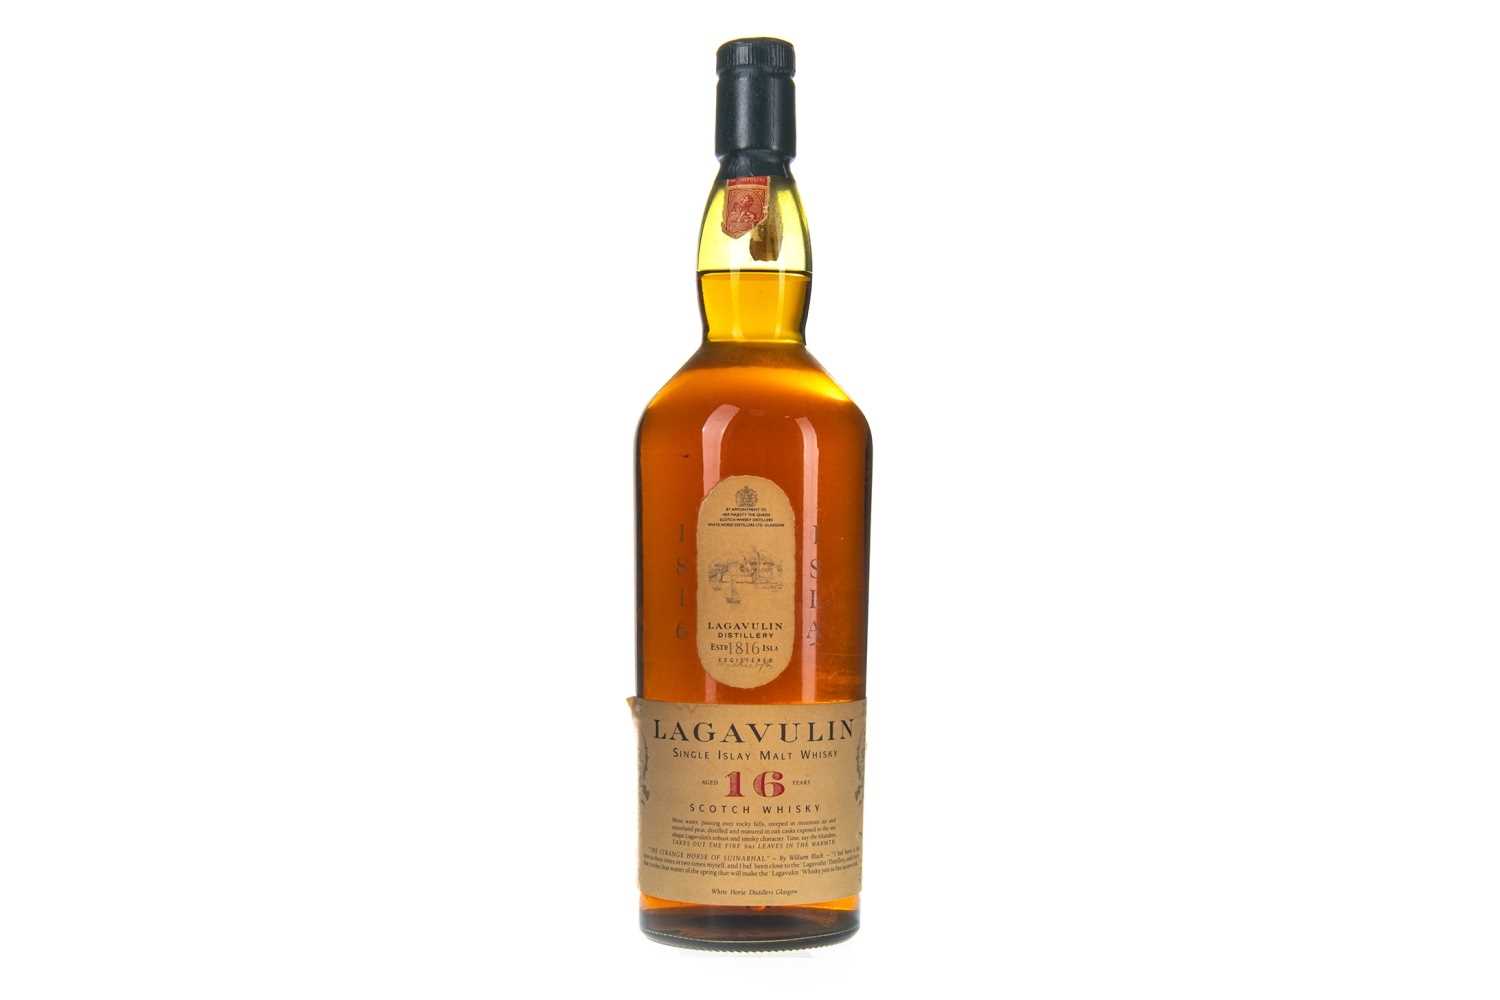 Lot 28 - LAGAVULIN AGED 16 YEARS WHITE HORSE DISTILLERS - ONE LITRE